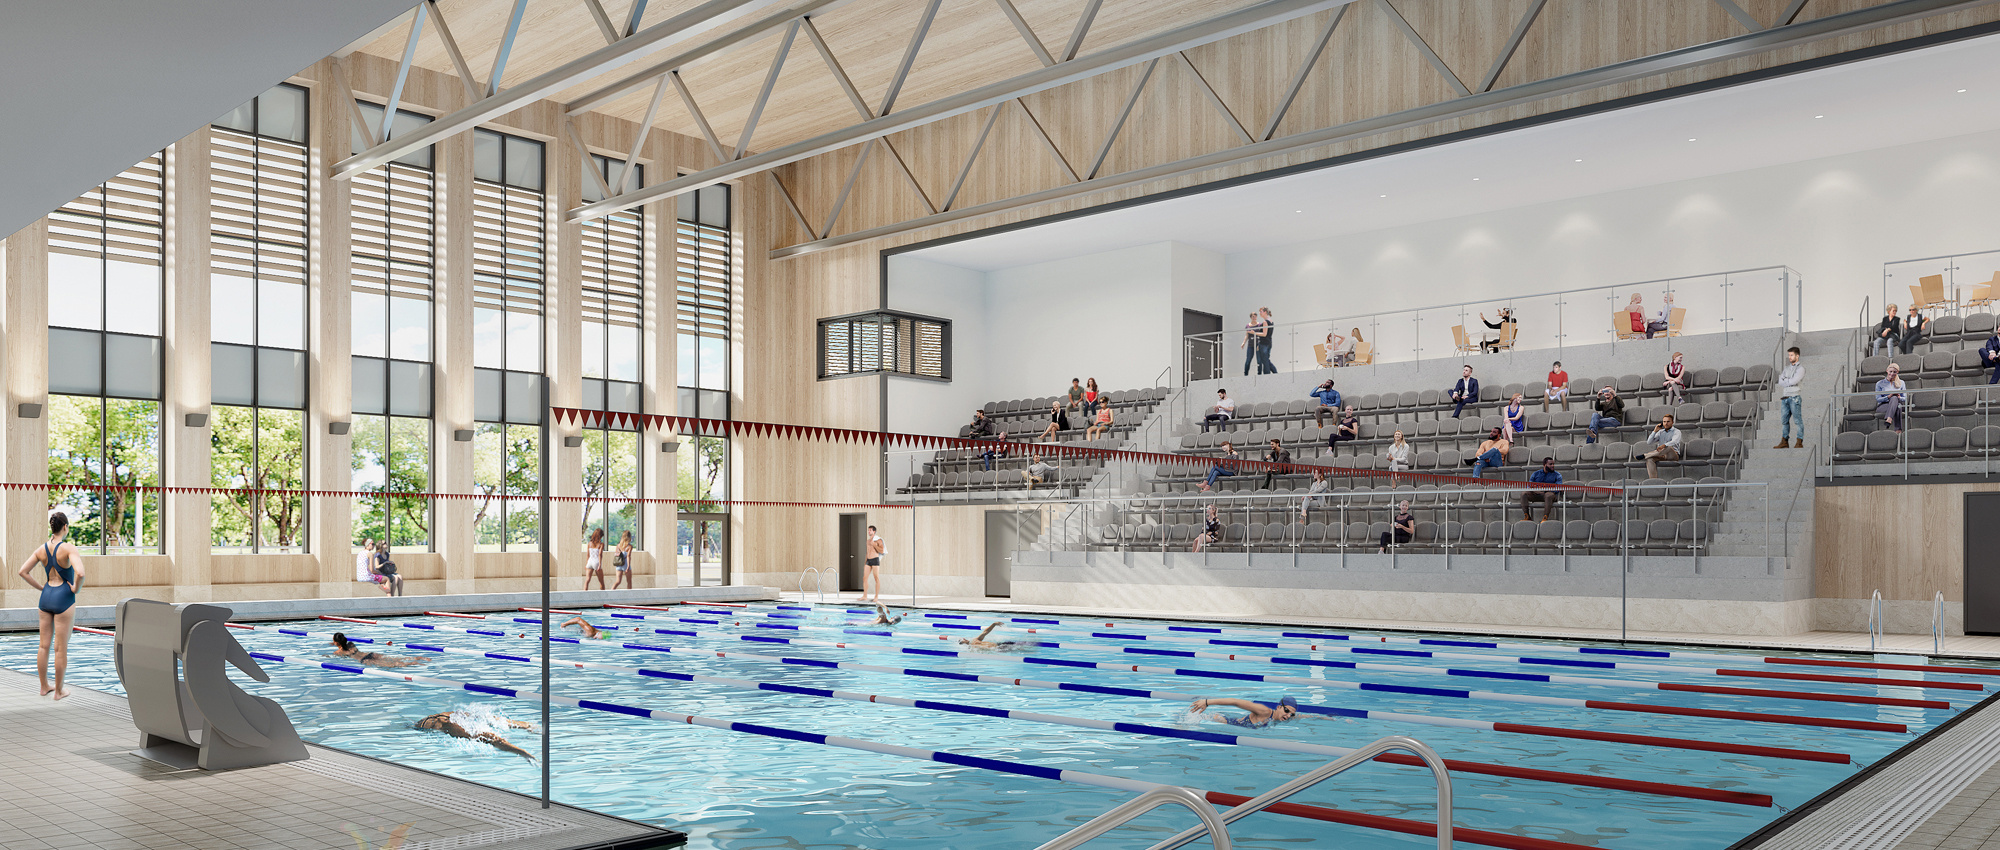 Spelthorne Leisure Centre: 25m swimming pool with eight lanes, micro filtration and spectator seating. Image: Spelthorne Borough Council